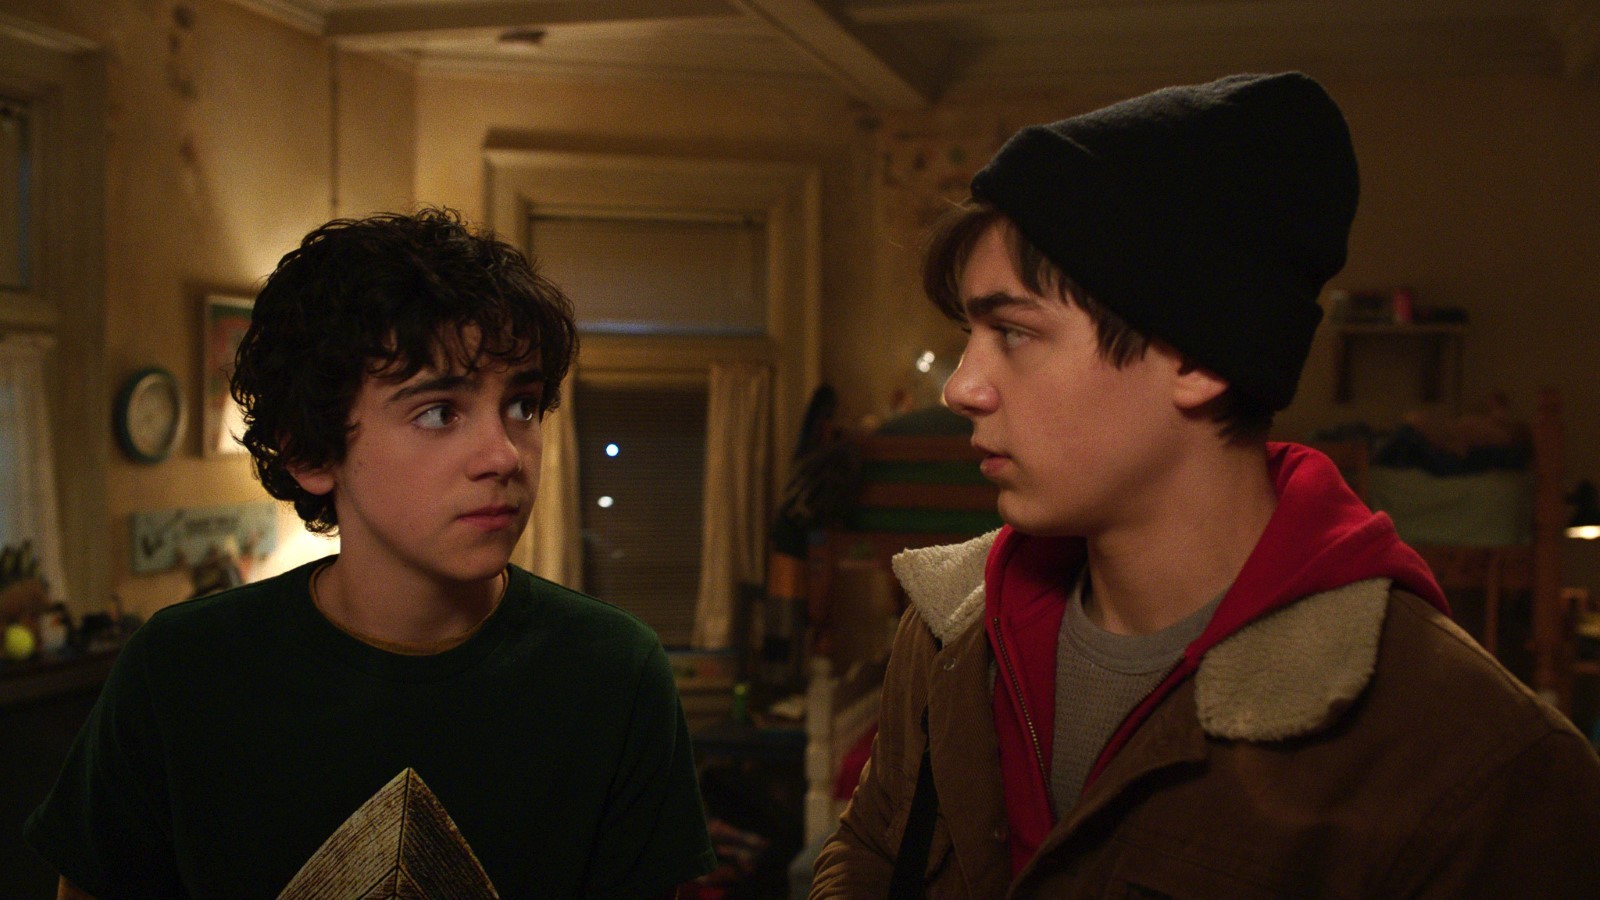 Asher Angel (R) with Dylan Grazer (L) in Shazam (2019) [Credit Warner Bros. Pictures]